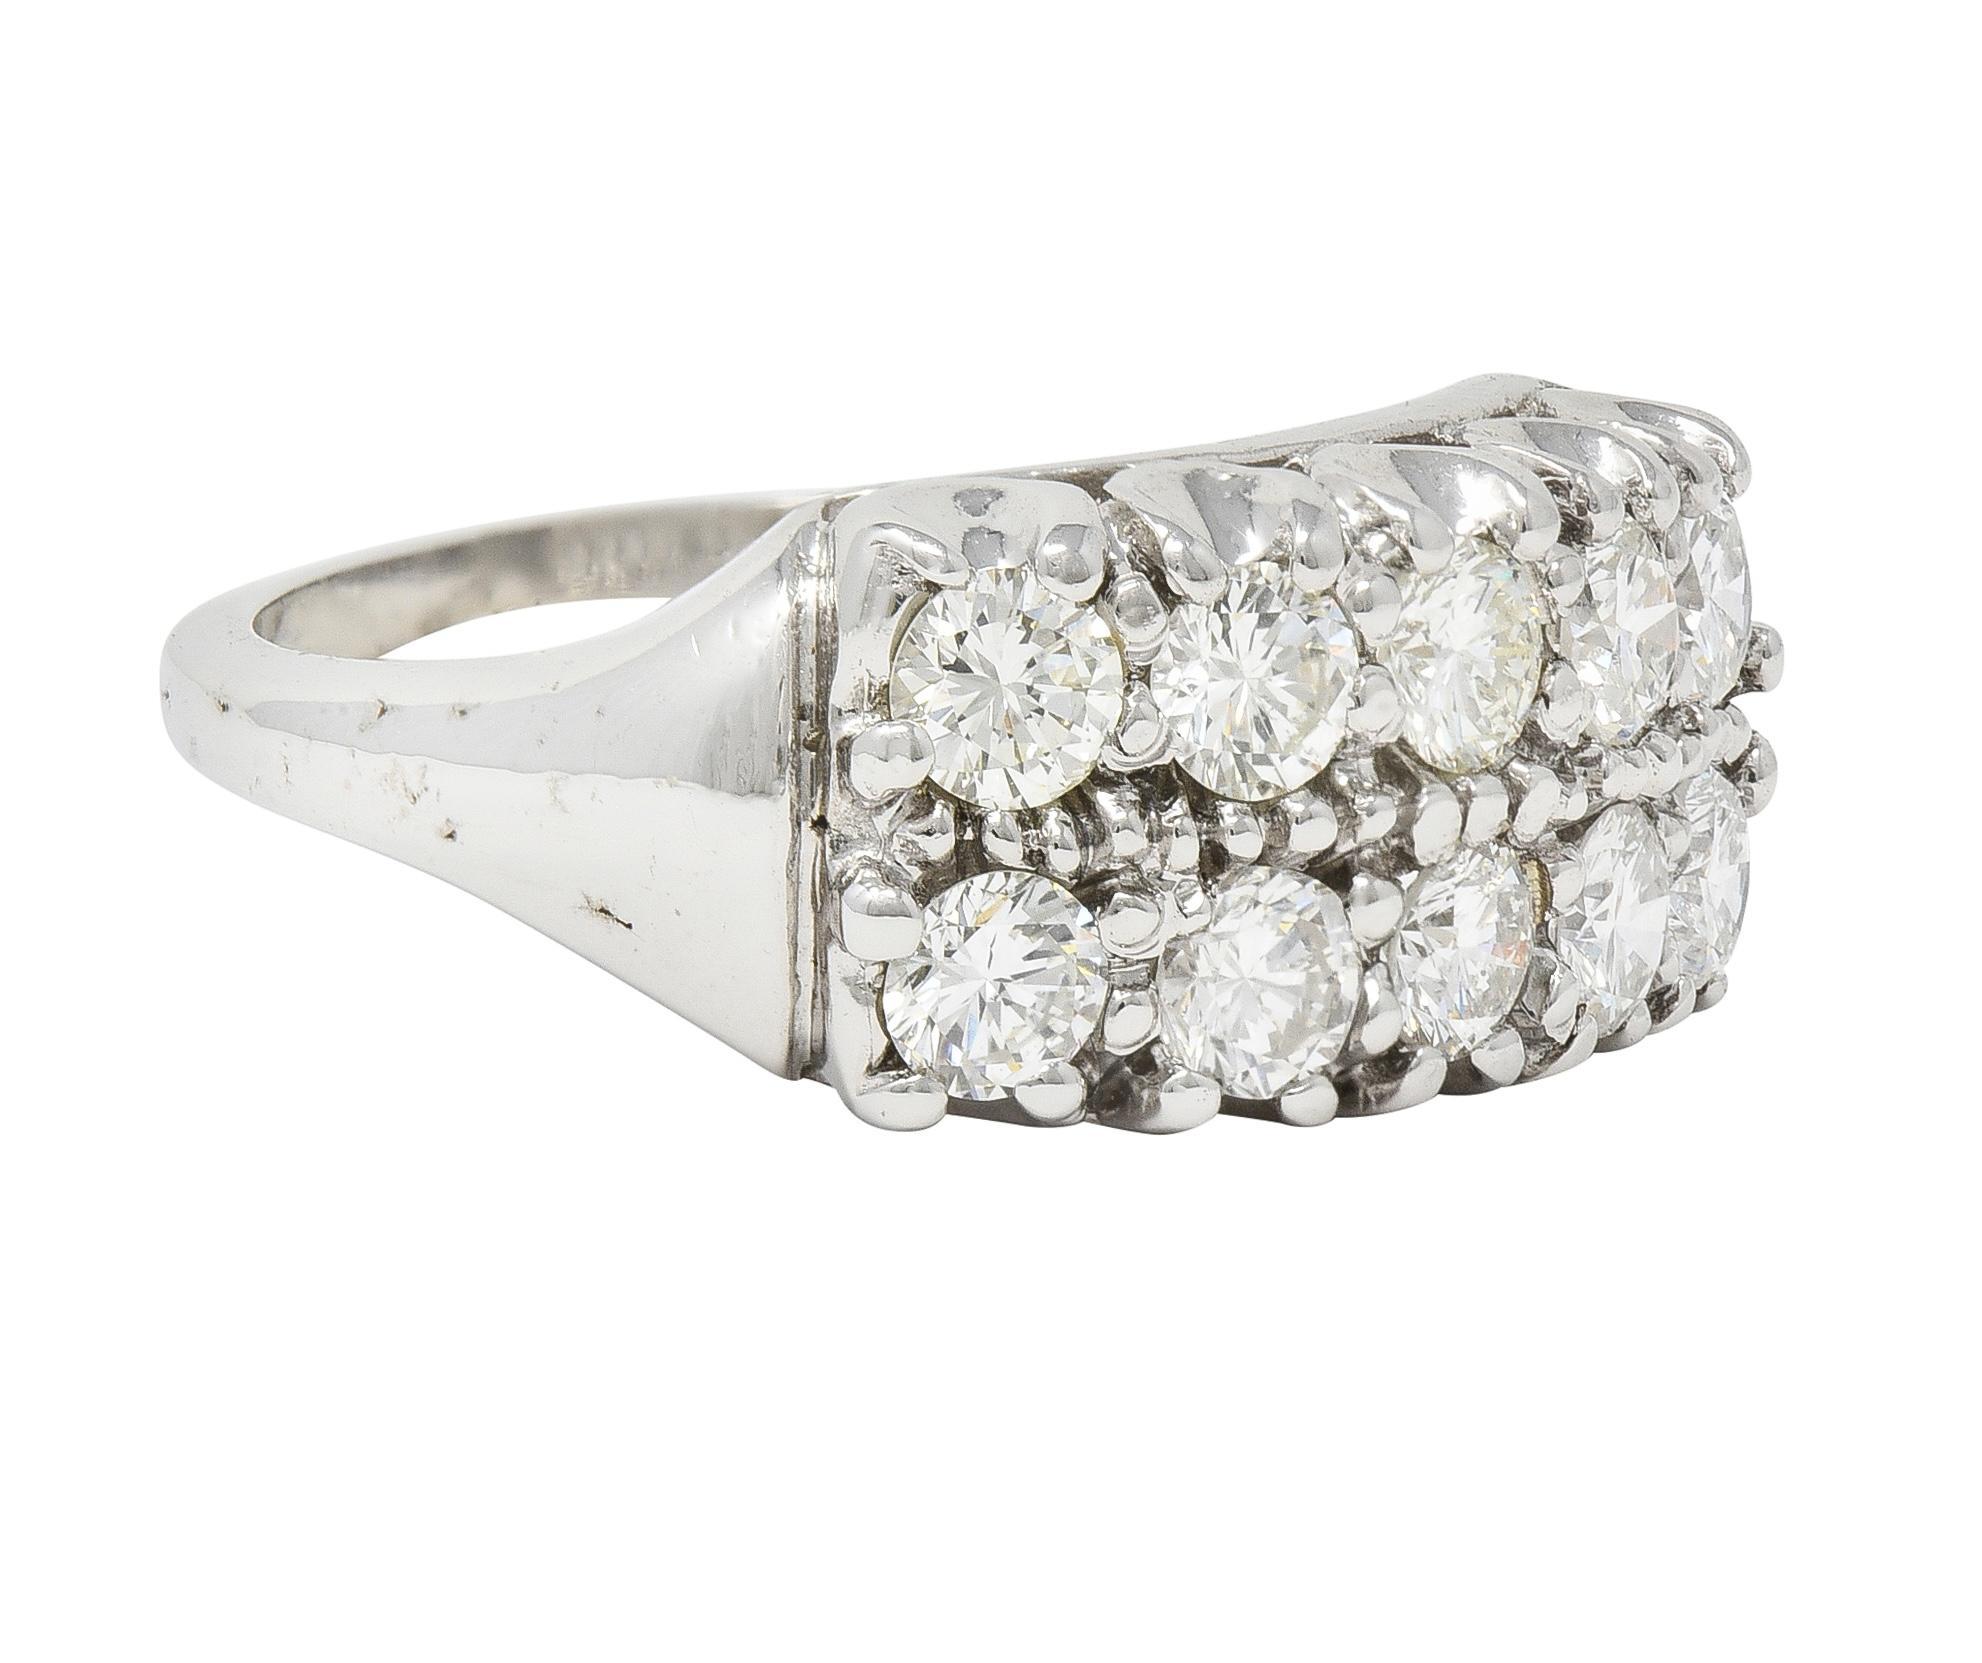 Band ring is designed as two east to west rows of round brilliant cut diamonds
Weighing collectively approximately 1.50 carats with G/H color and VS clarity
Set with fishtail motif prongs
Stamped for 14 karat gold
Circa: 1940s
Ring Size: 5 3/4 &